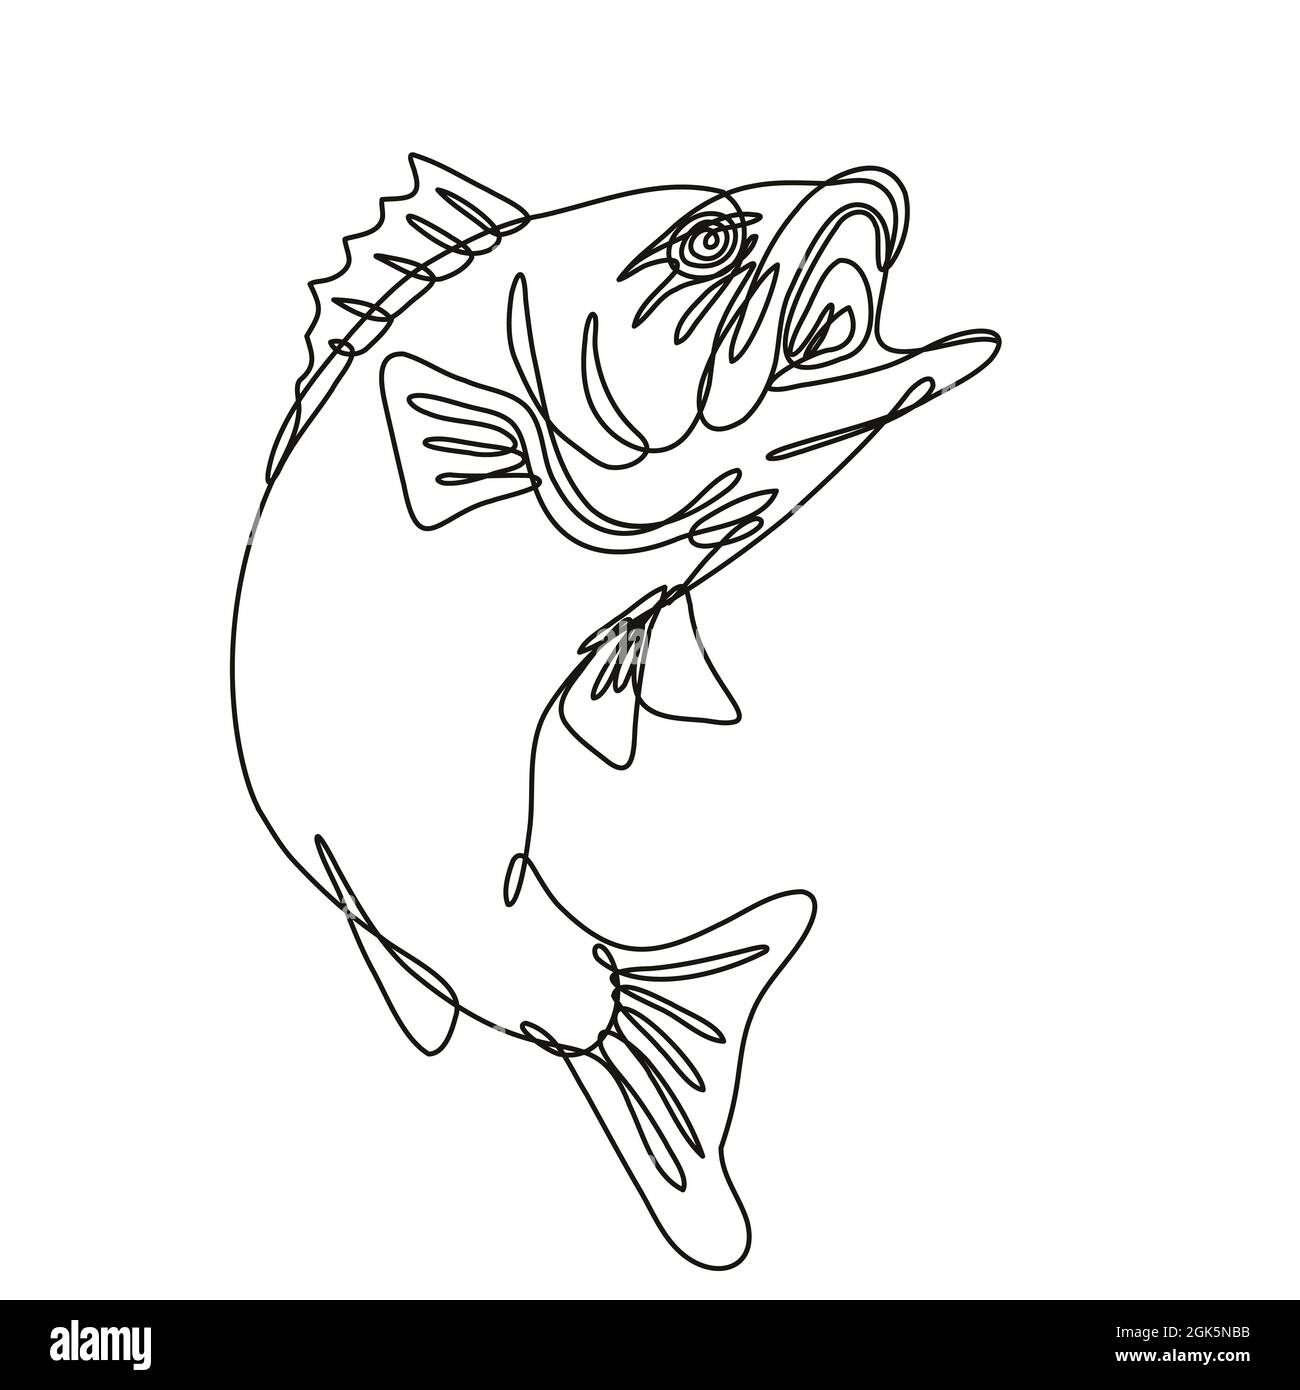 Largemouth Bass Jumping Up Continuous Line Drawing Stock Photo - Alamy